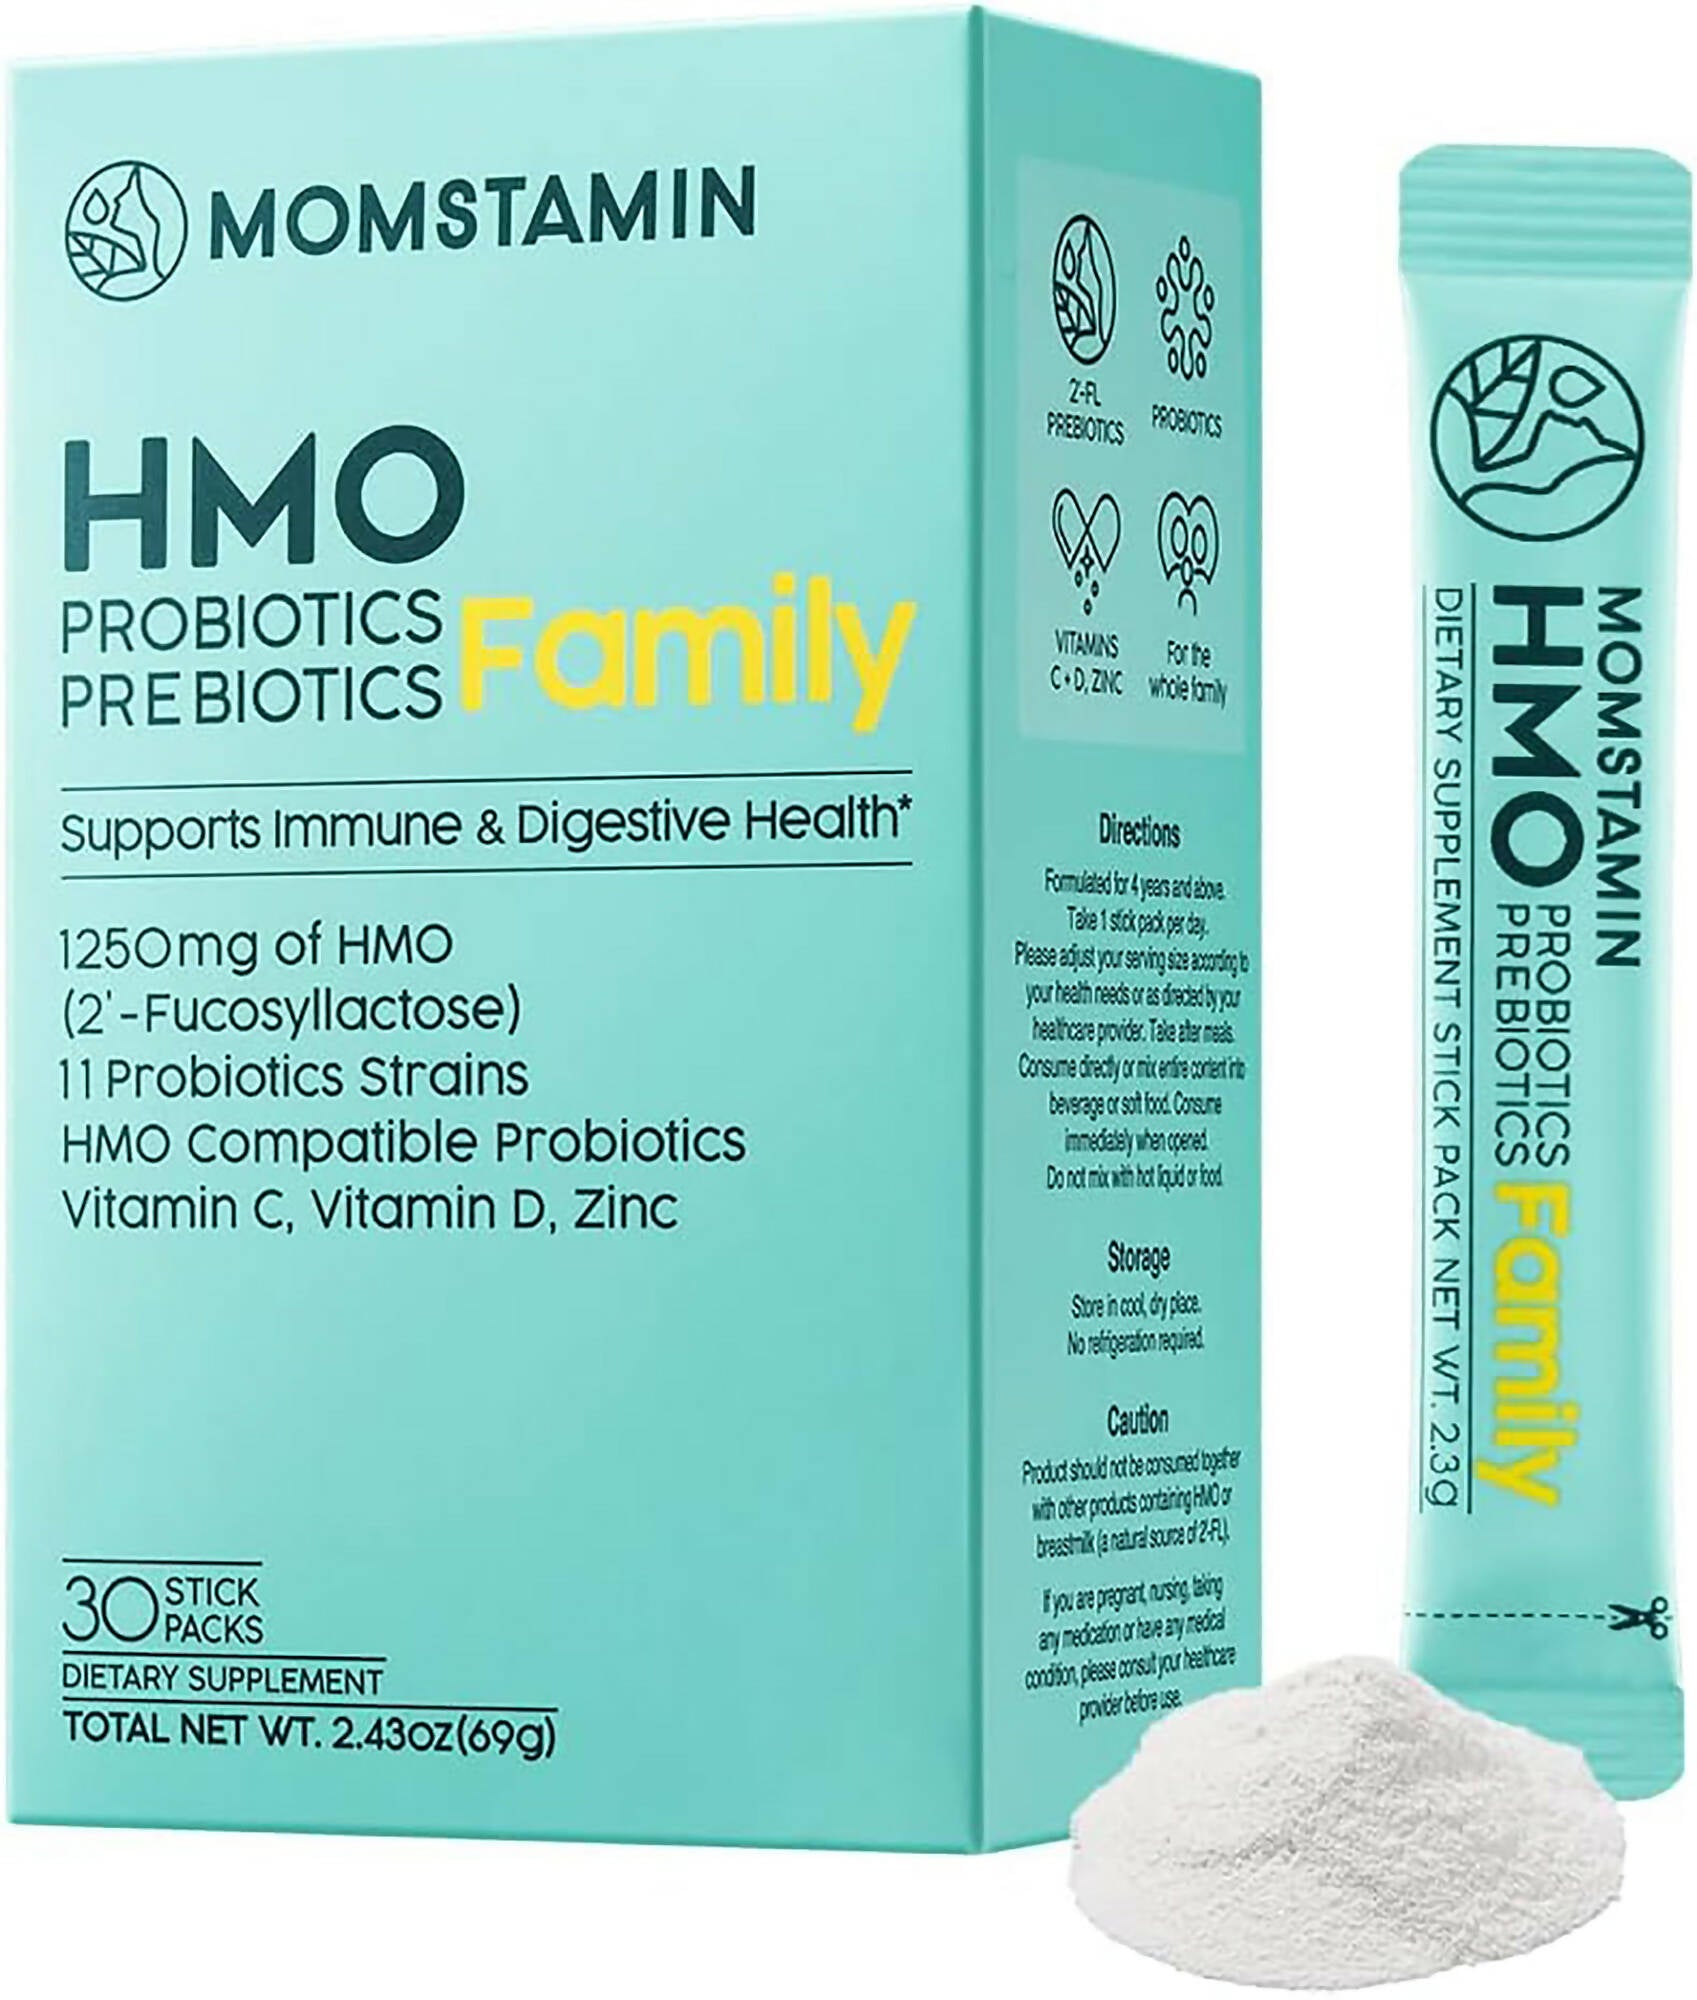 MOMSTAMIN HMO FAMILY 3MONTHS PACK